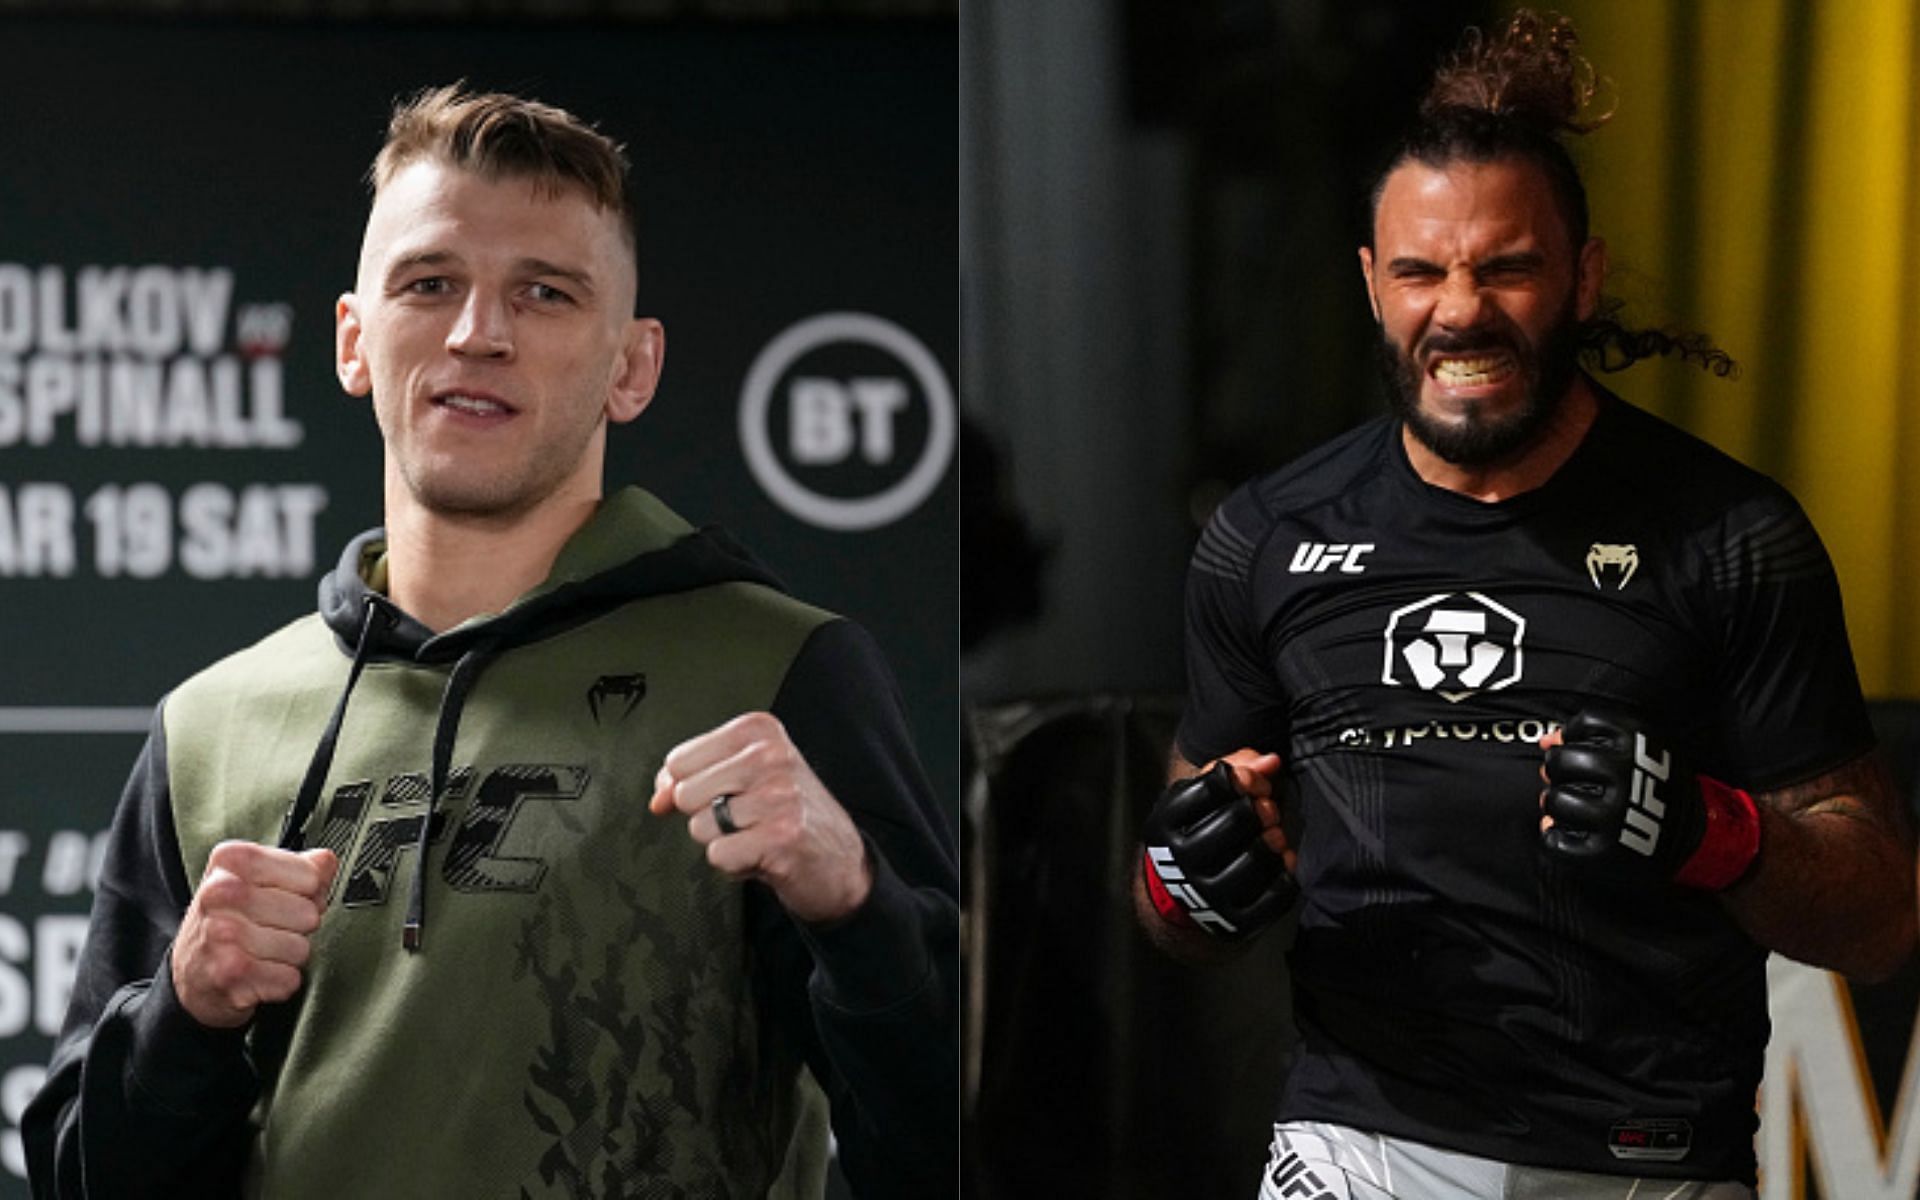 Dan Hooker (left) and Clay Guida (right)(Images via Getty)